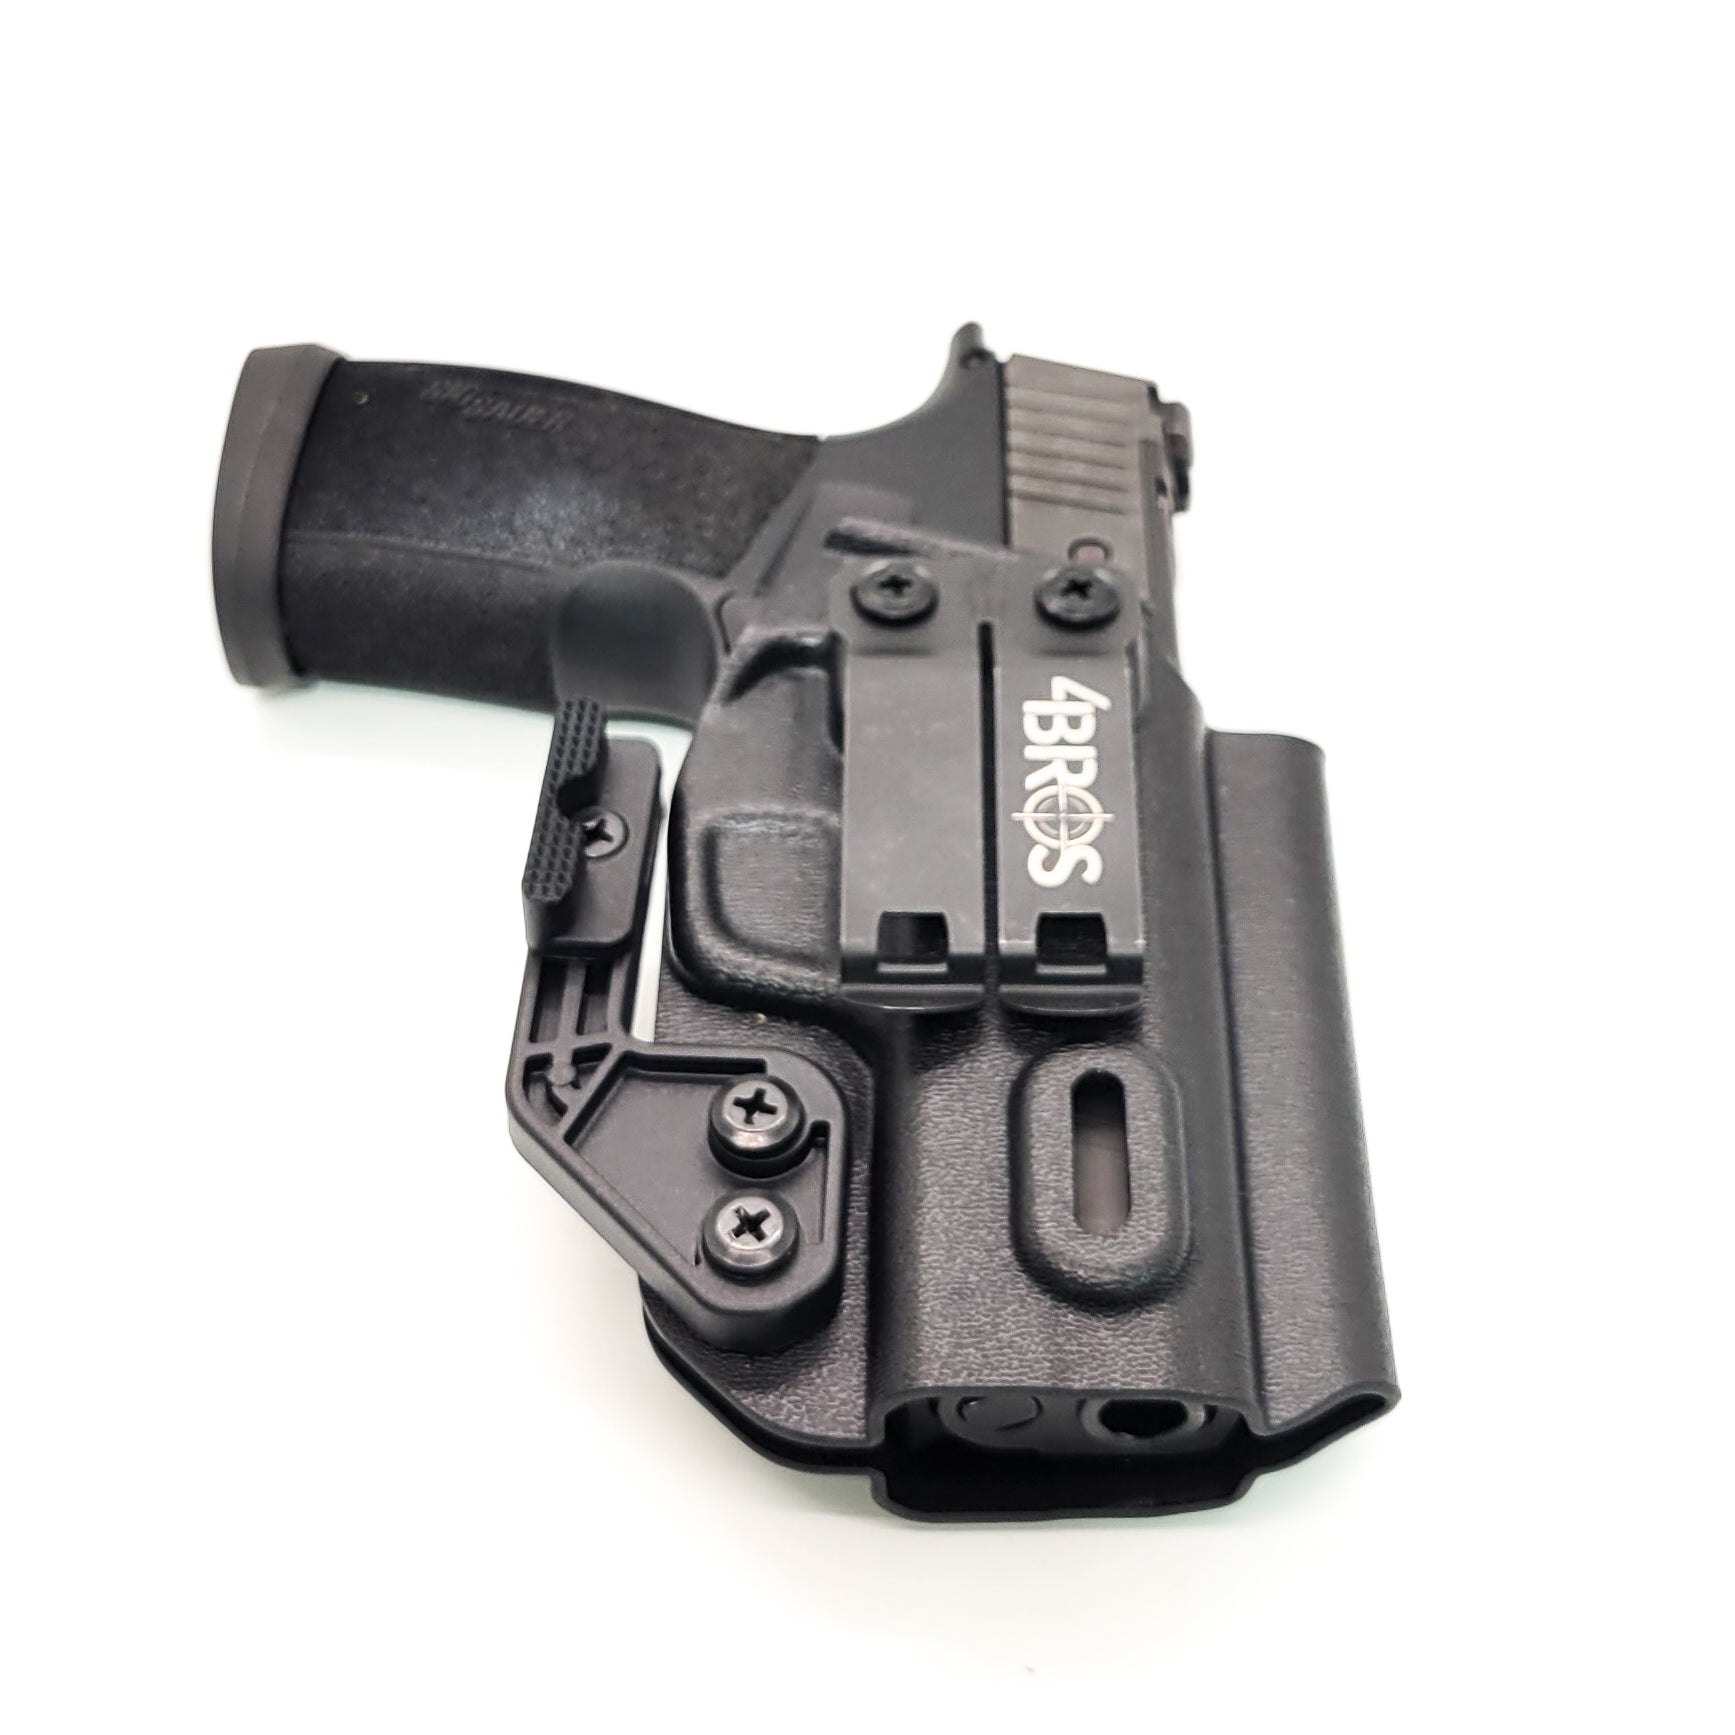 For the 2023 best Inside Waistband IWB AIWB Kydex Holster designed to fit the Sig Sauer P365-XMACRO TACOPS, P365-XMACRO COMP, P365-XMACRO, and P365-XMACRO COMP ROMEOZERO ELITE handgun, shop Four Brothers Holsters.  Full sweat guard, adjustable retention. Open muzzle for threaded barrel and cleared for red dot sights. 